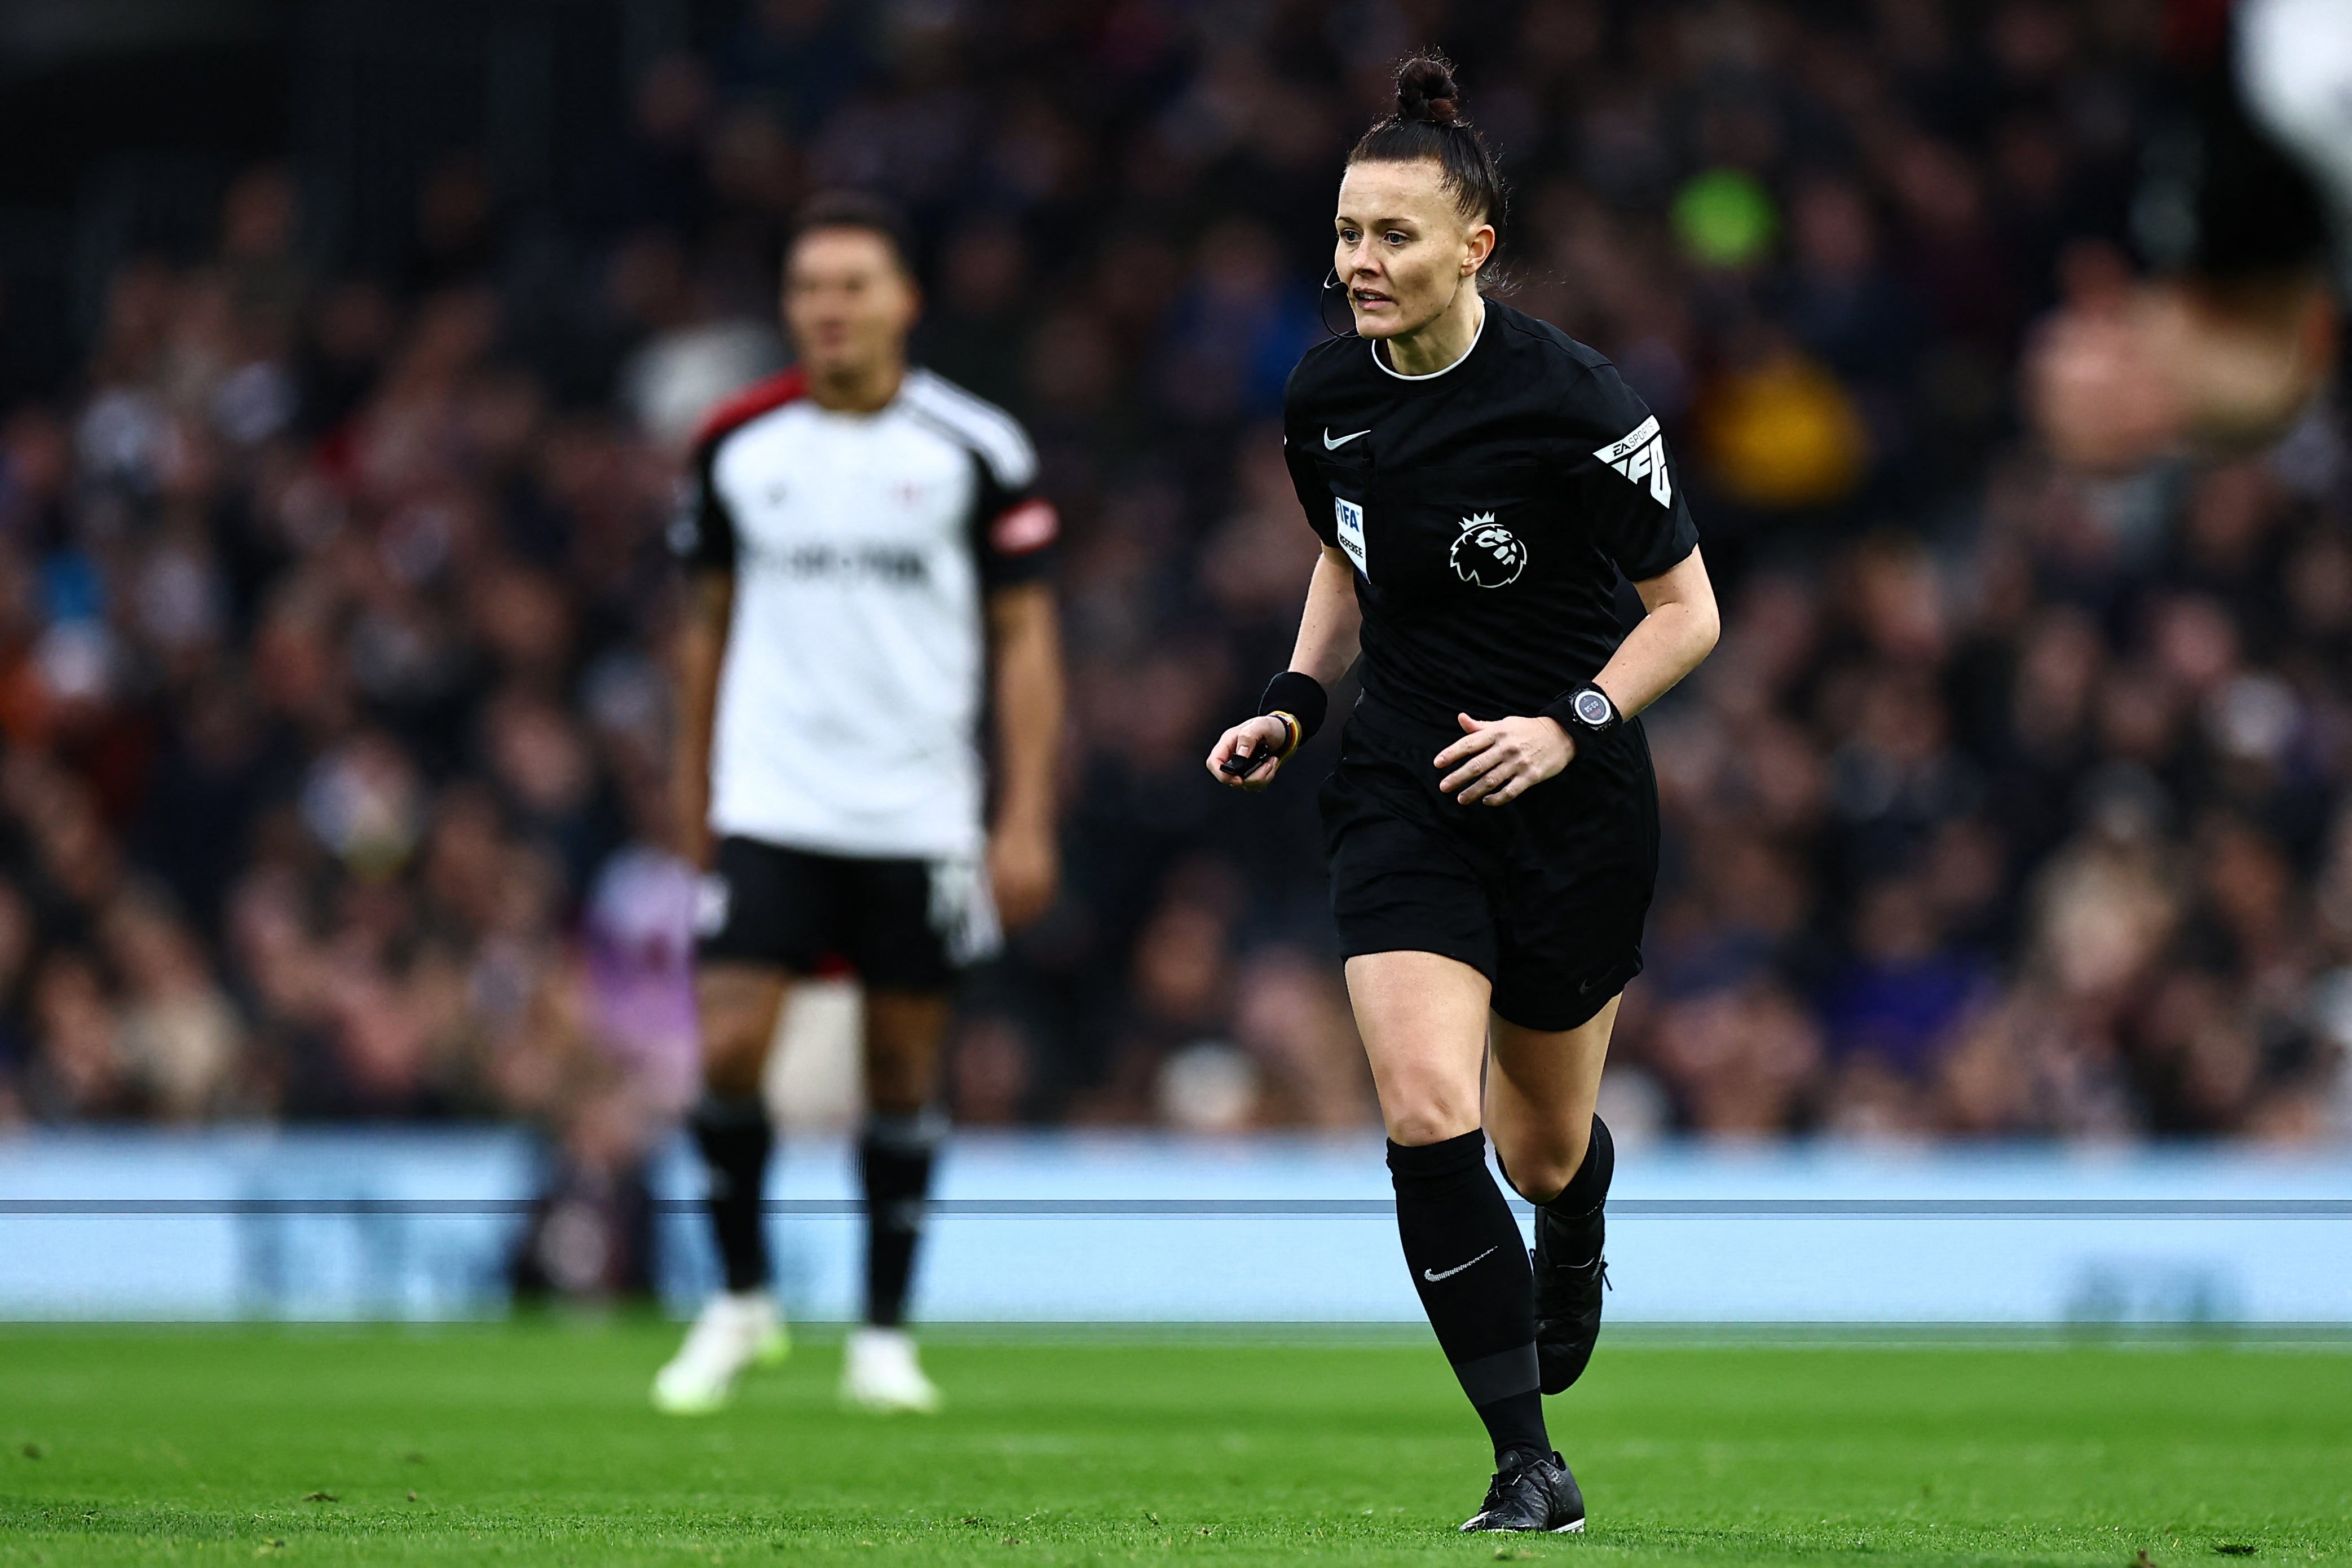 English referee Rebecca Welch officiating in her first premier league game